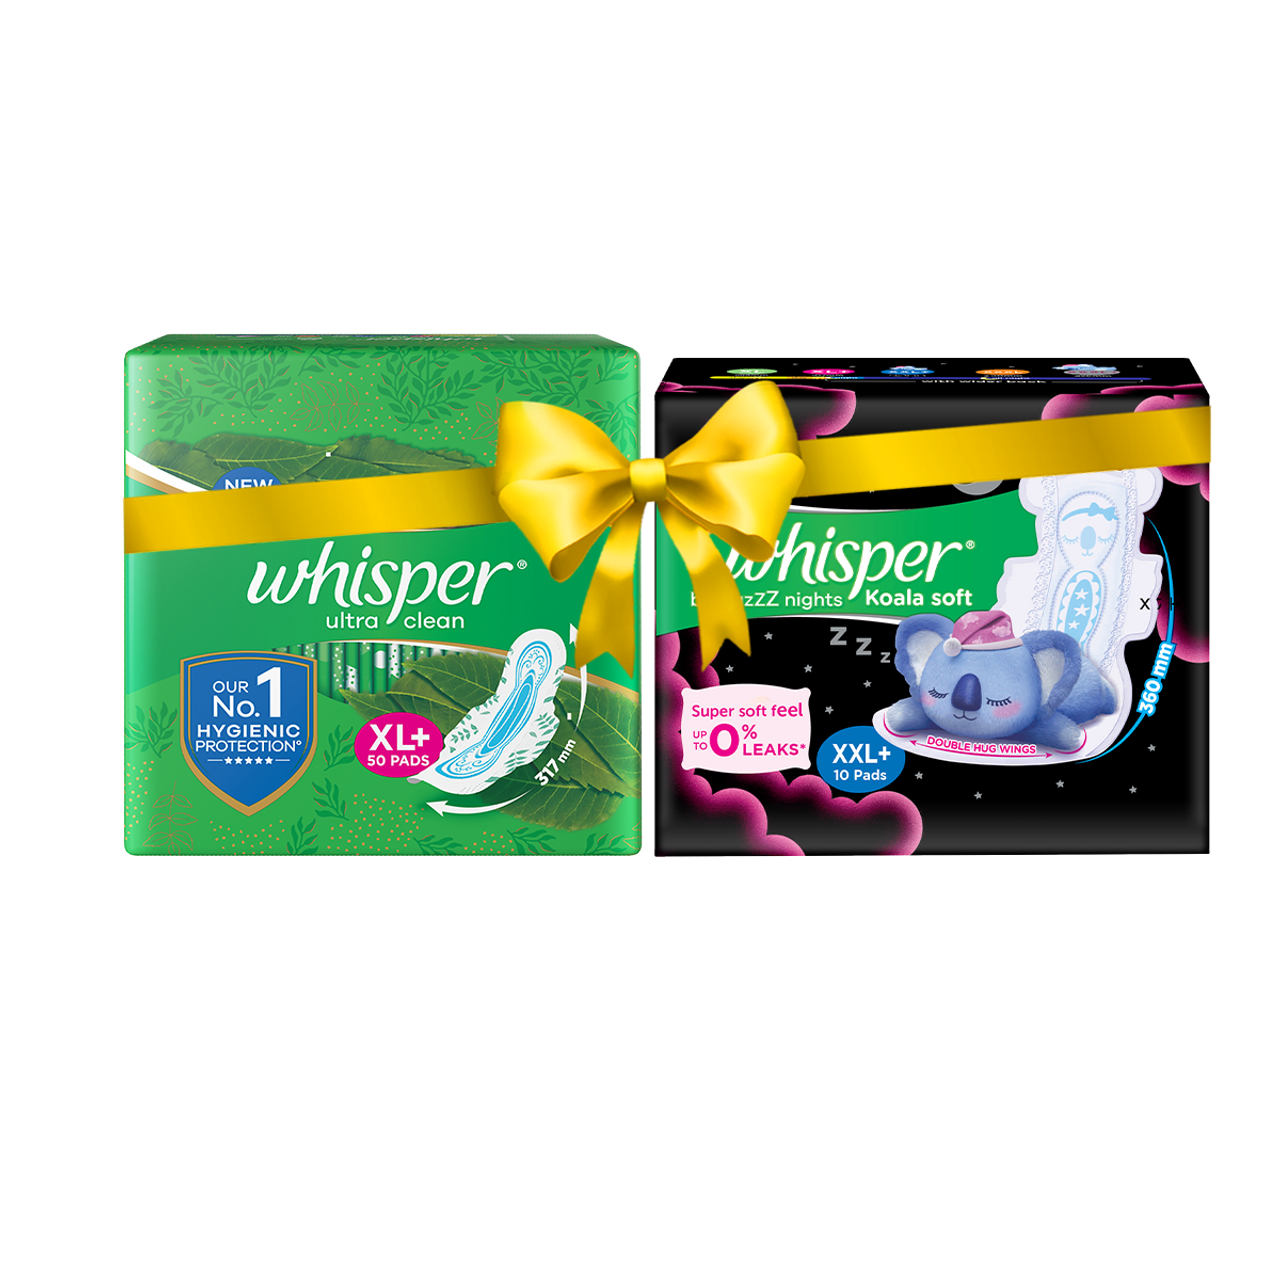 Whisper Ultra Soft Sanitary Pads - 50 Pieces (XL) and Whisper Ultra  Overnight Sanitary Pads with Wings - 44 Pieces (XL Plus)